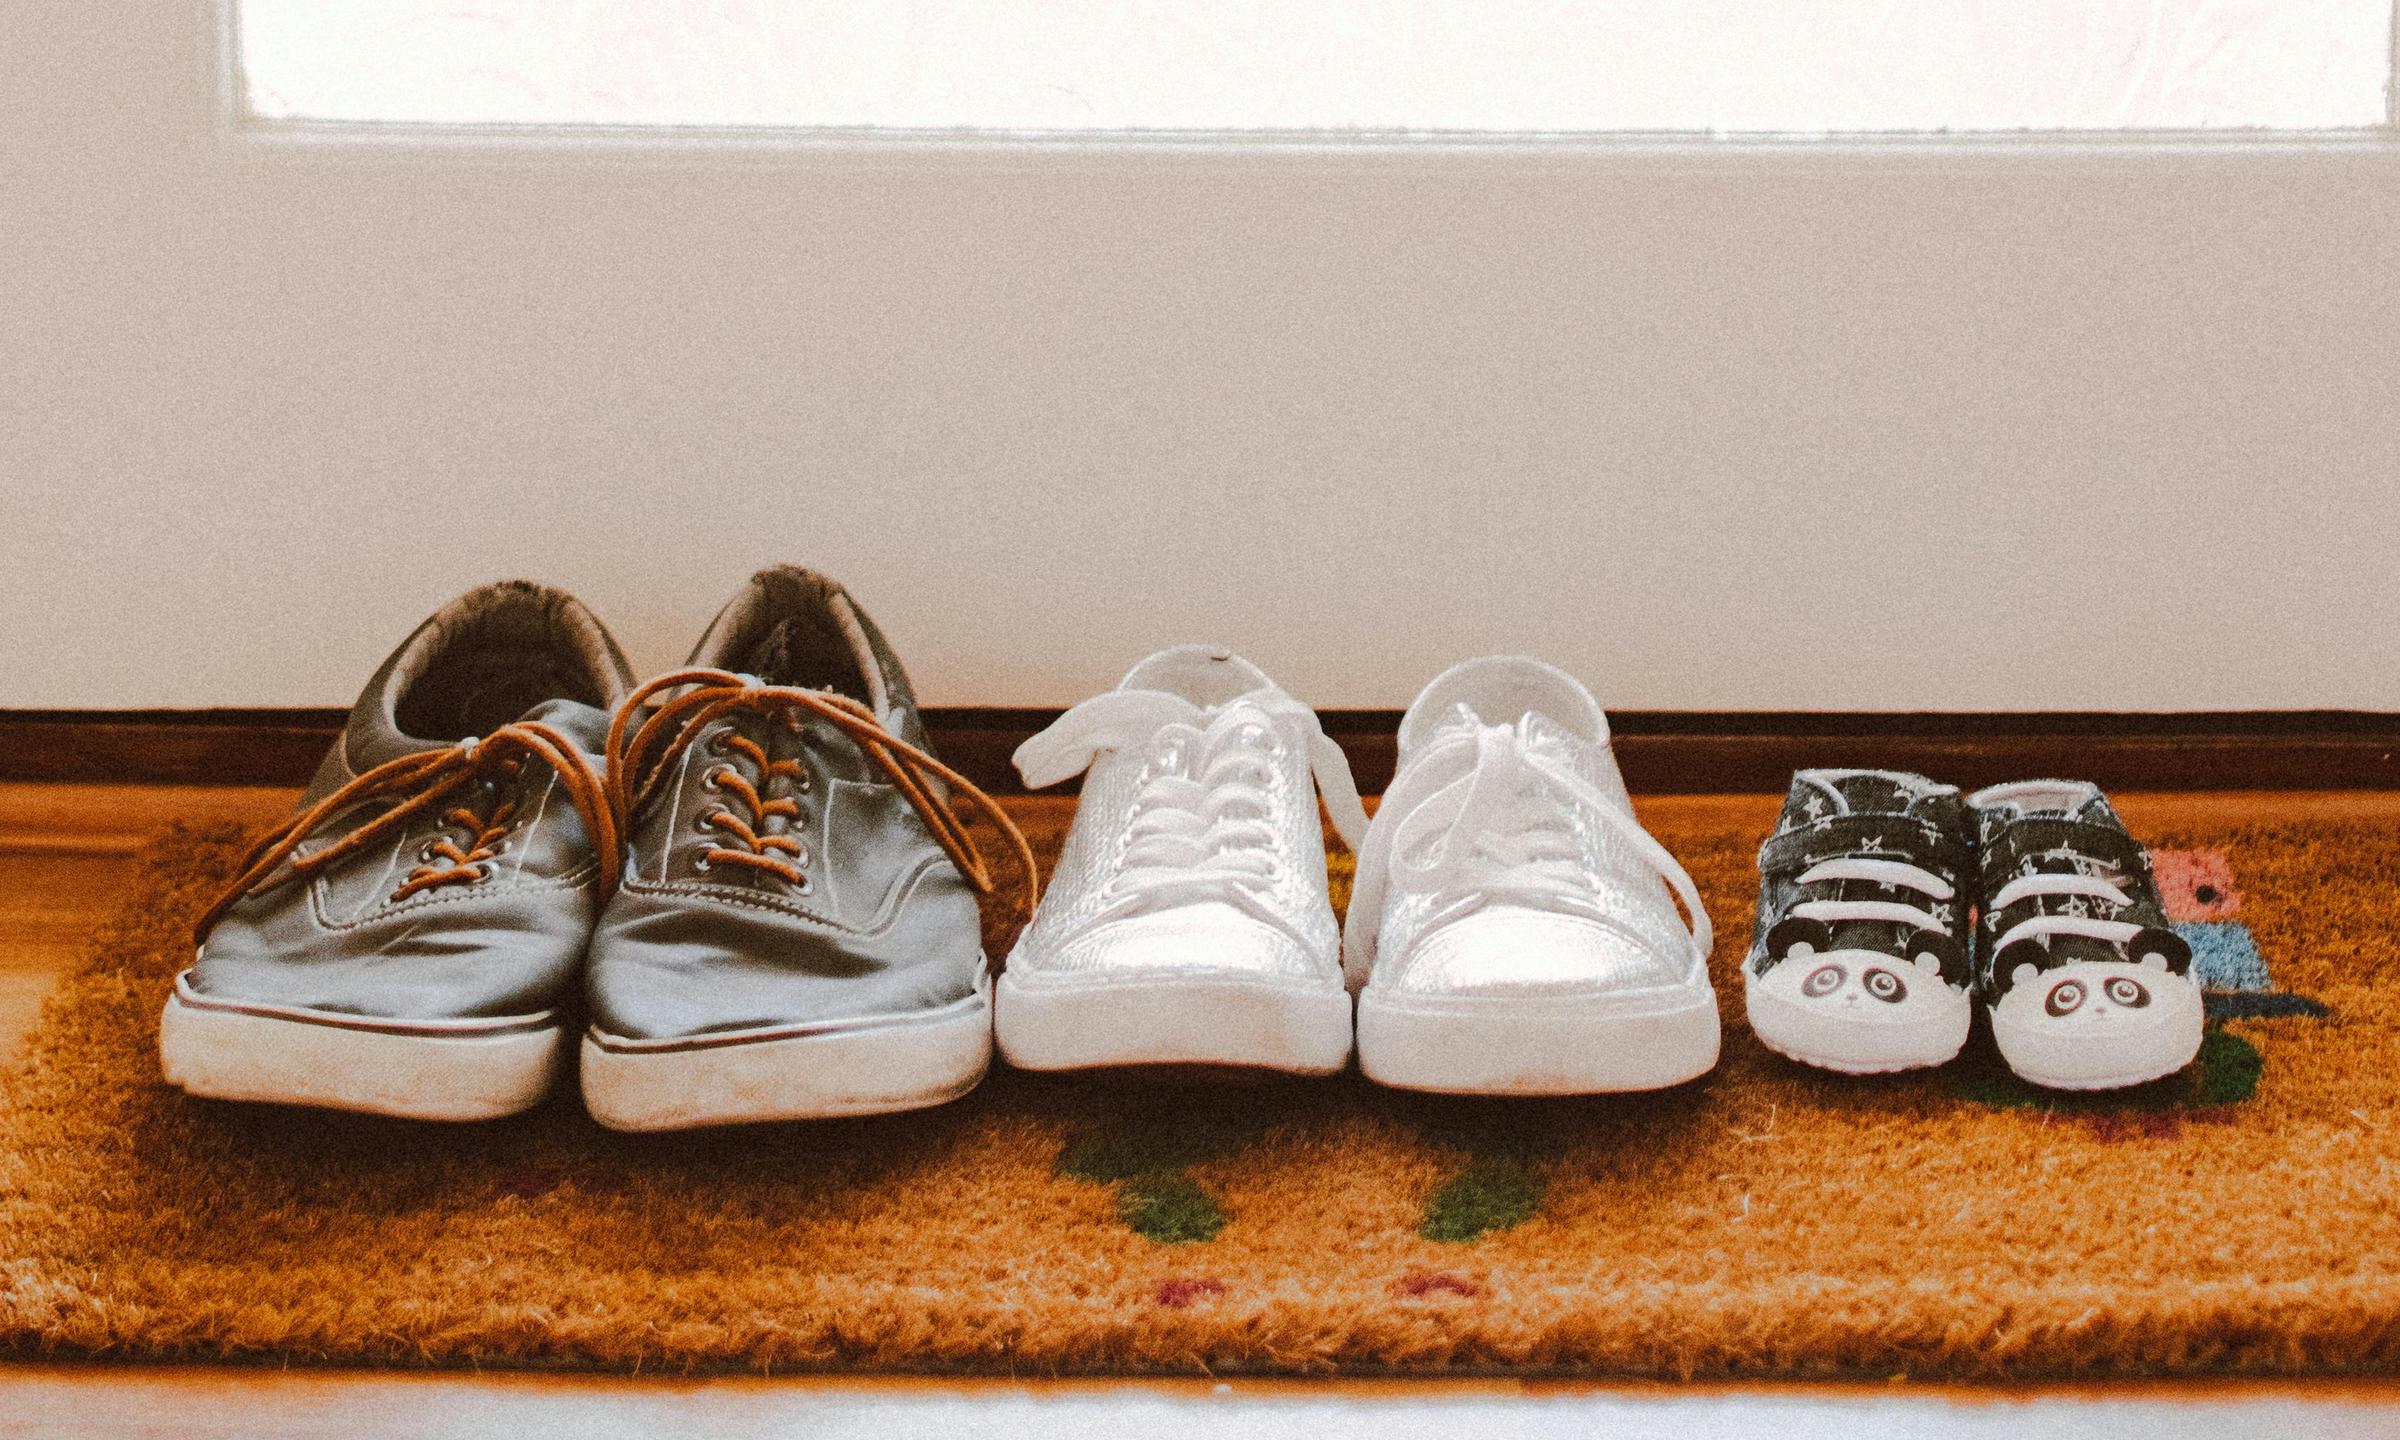 A line of unfamiliar shoes by the front door, hinting at a mystery | Source: Pexels